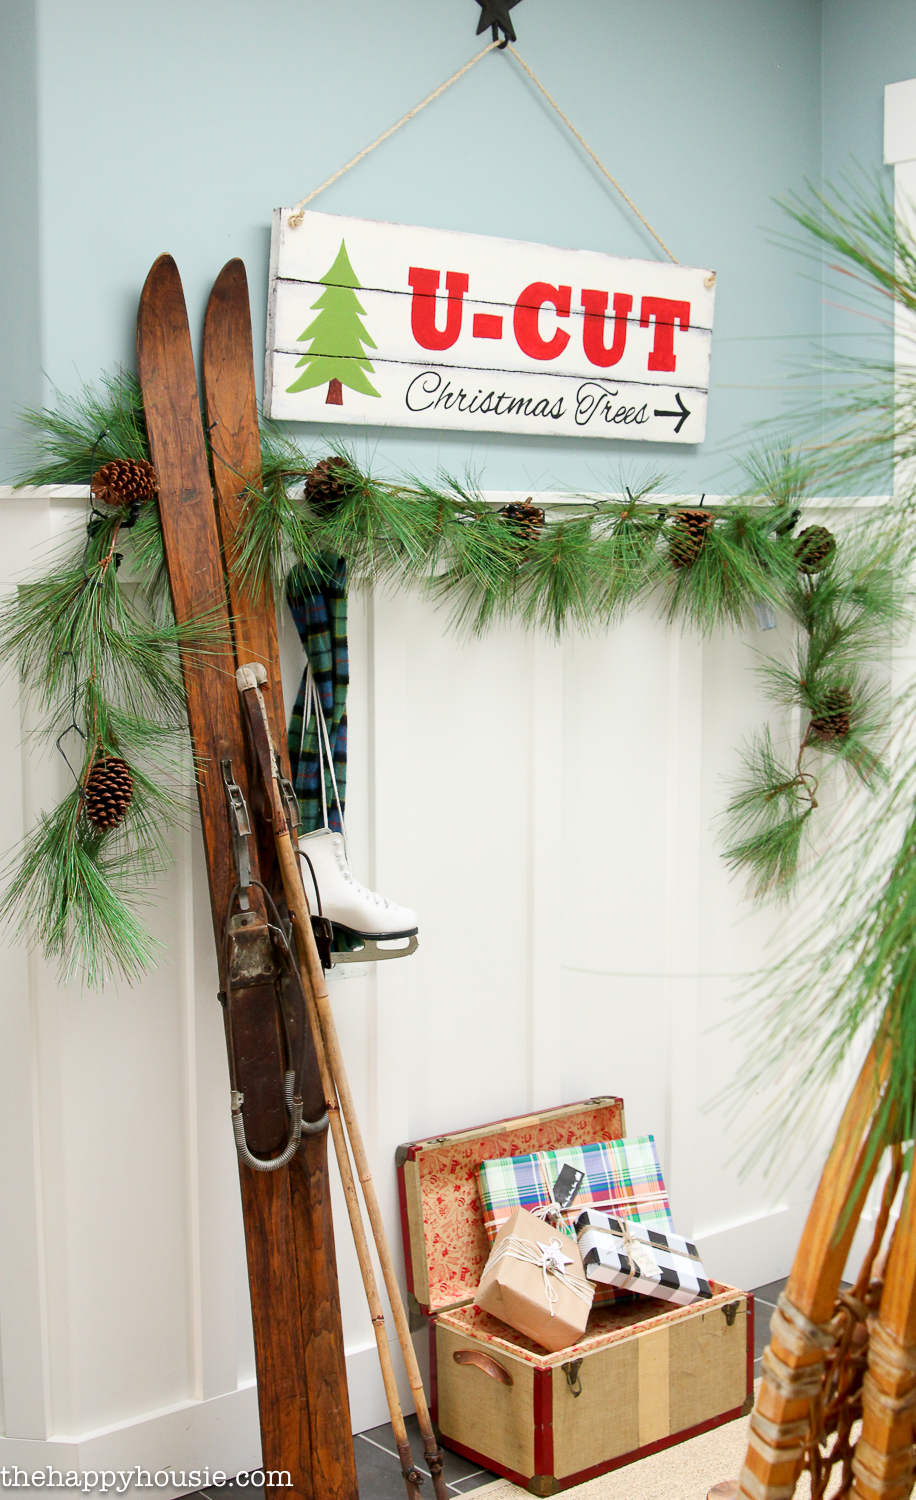 Vintage skis are leaning against the wall beside a sign that say U-Cut.